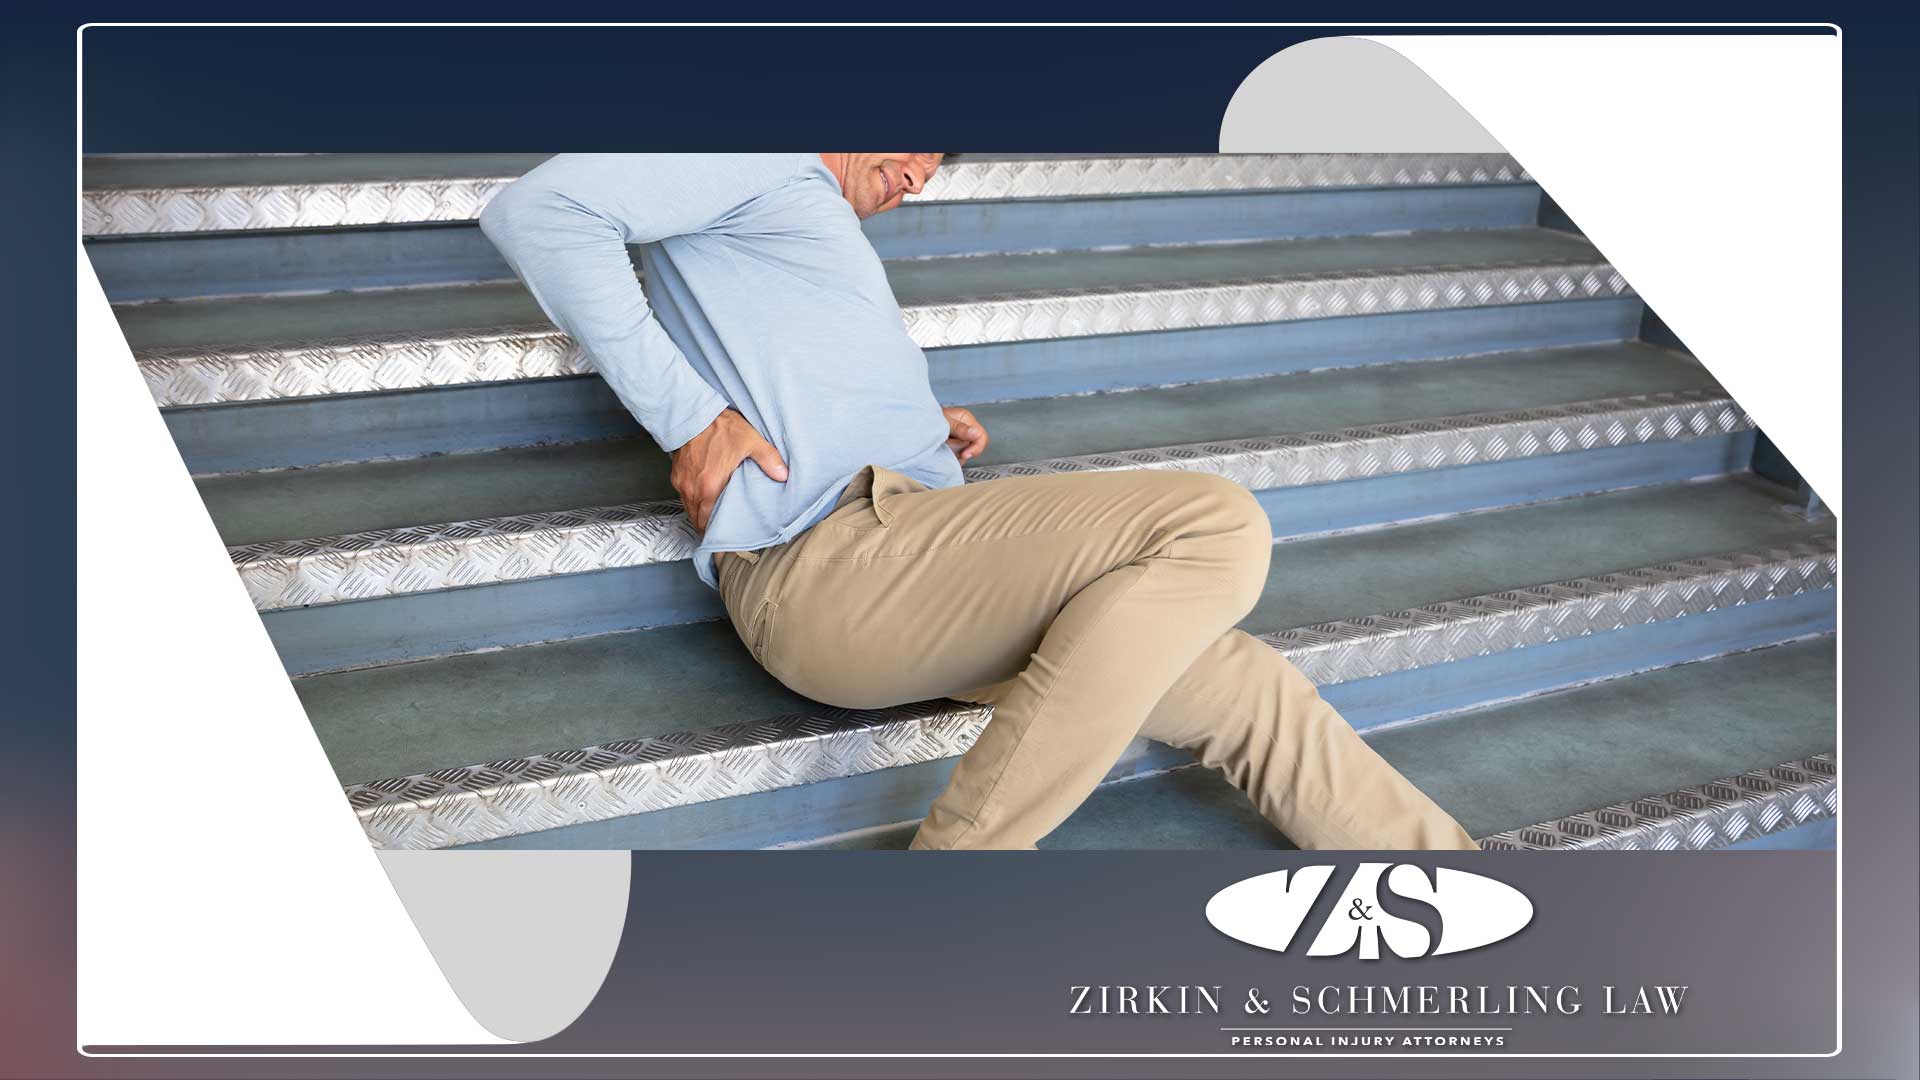 How to Prevent Slip and Fall Accidents